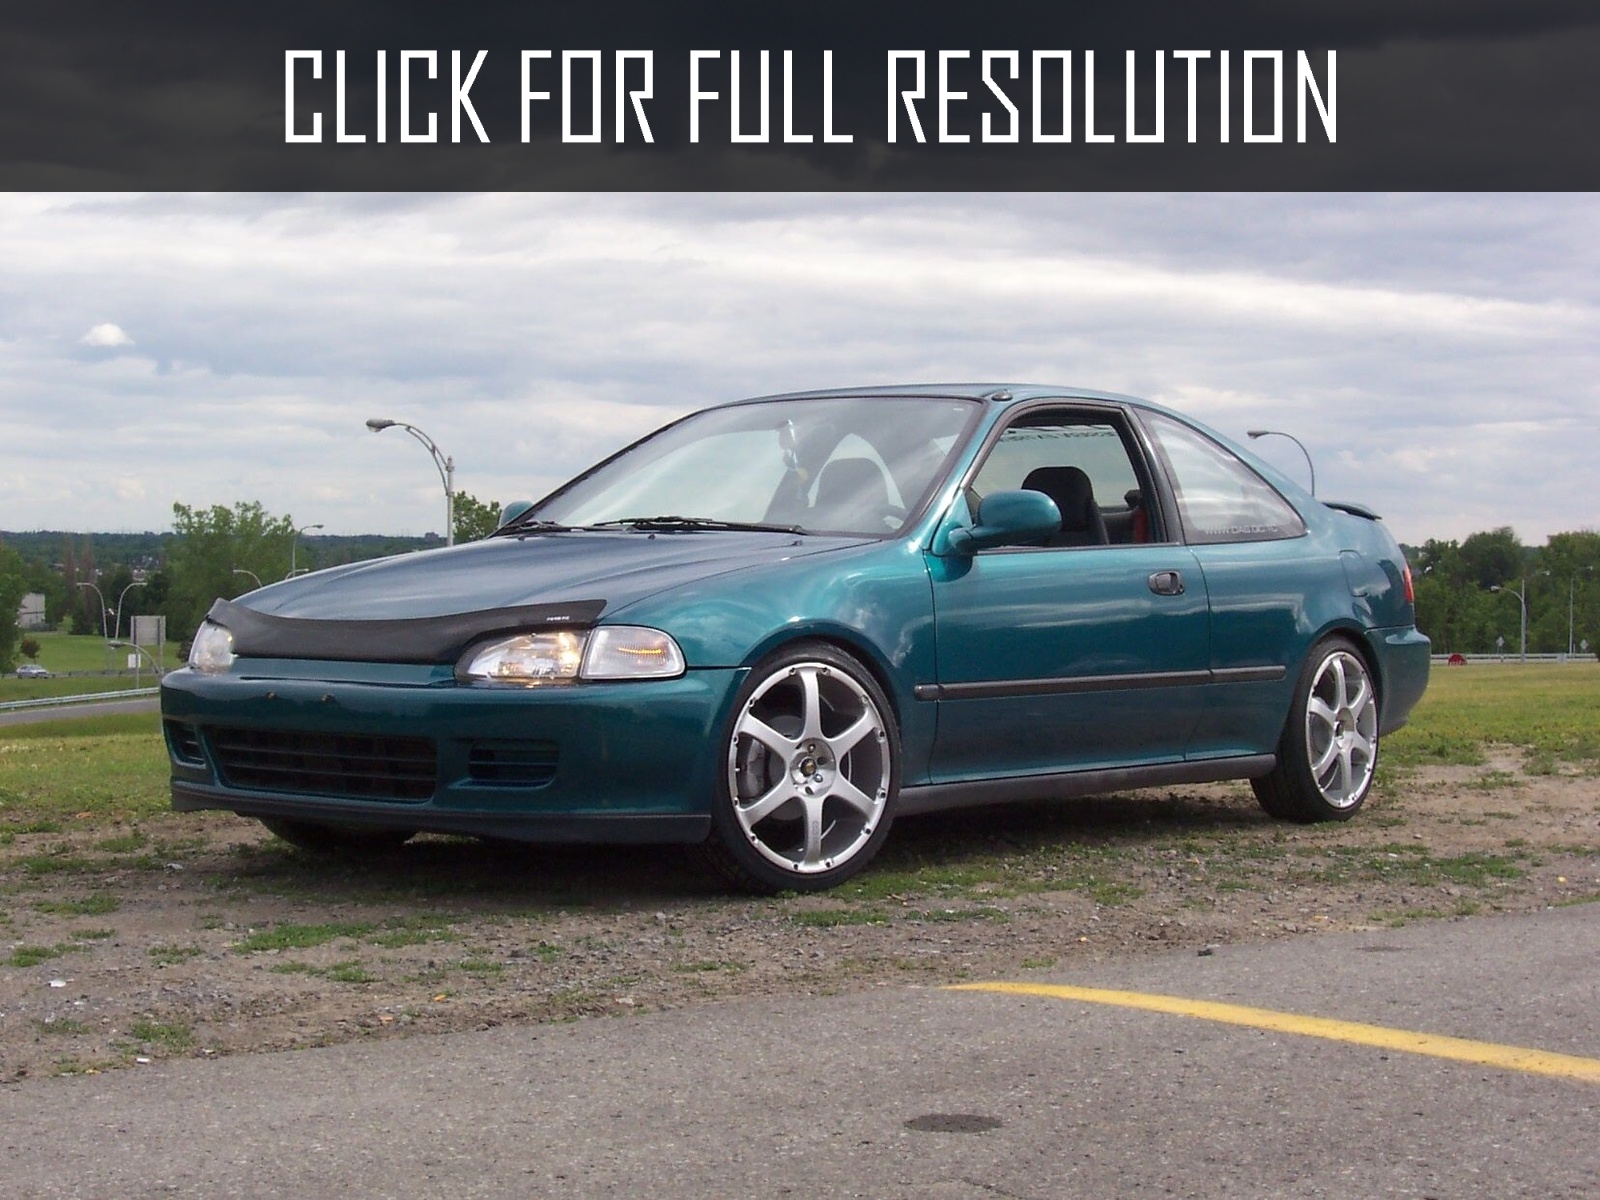 1995 Honda Civic Coupe - news, reviews, msrp, ratings with amazing images